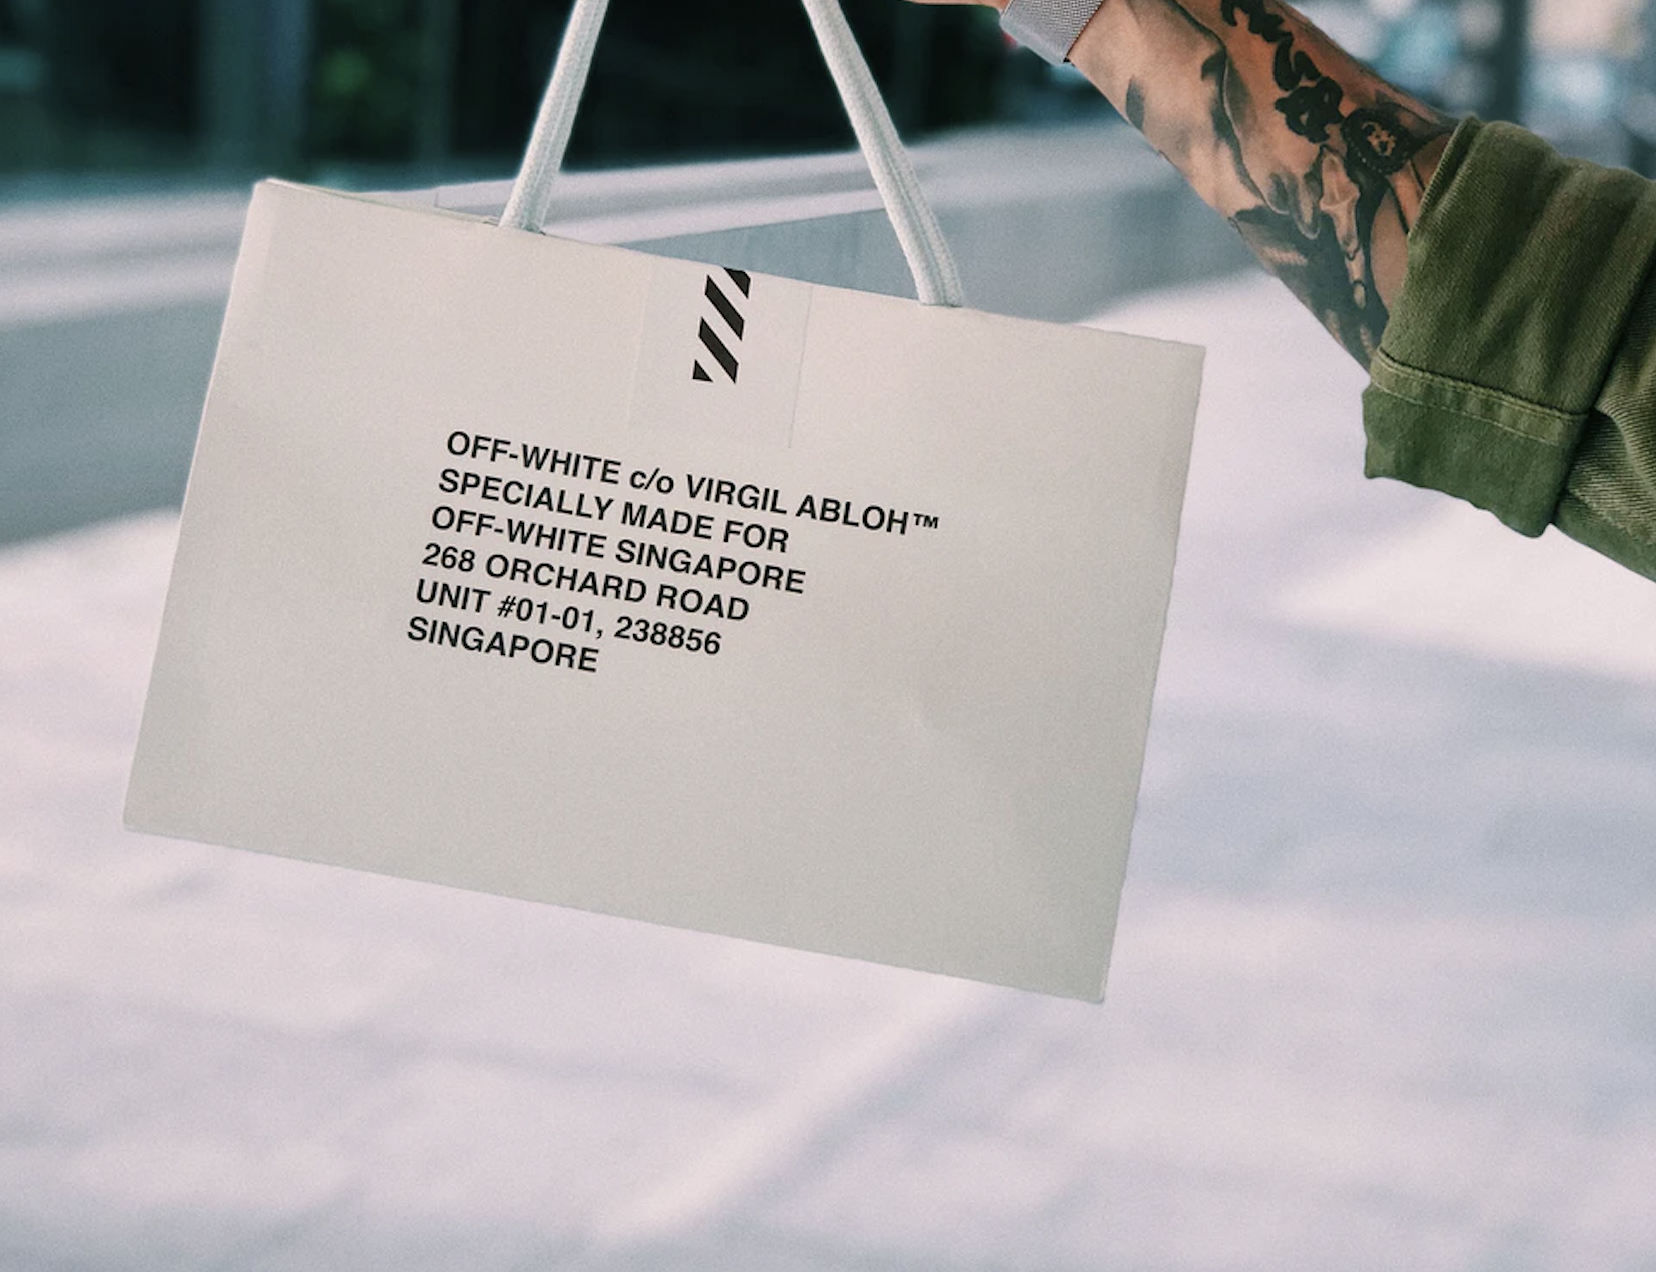 Could Virgil Abloh Trademark His Use of Quotes?